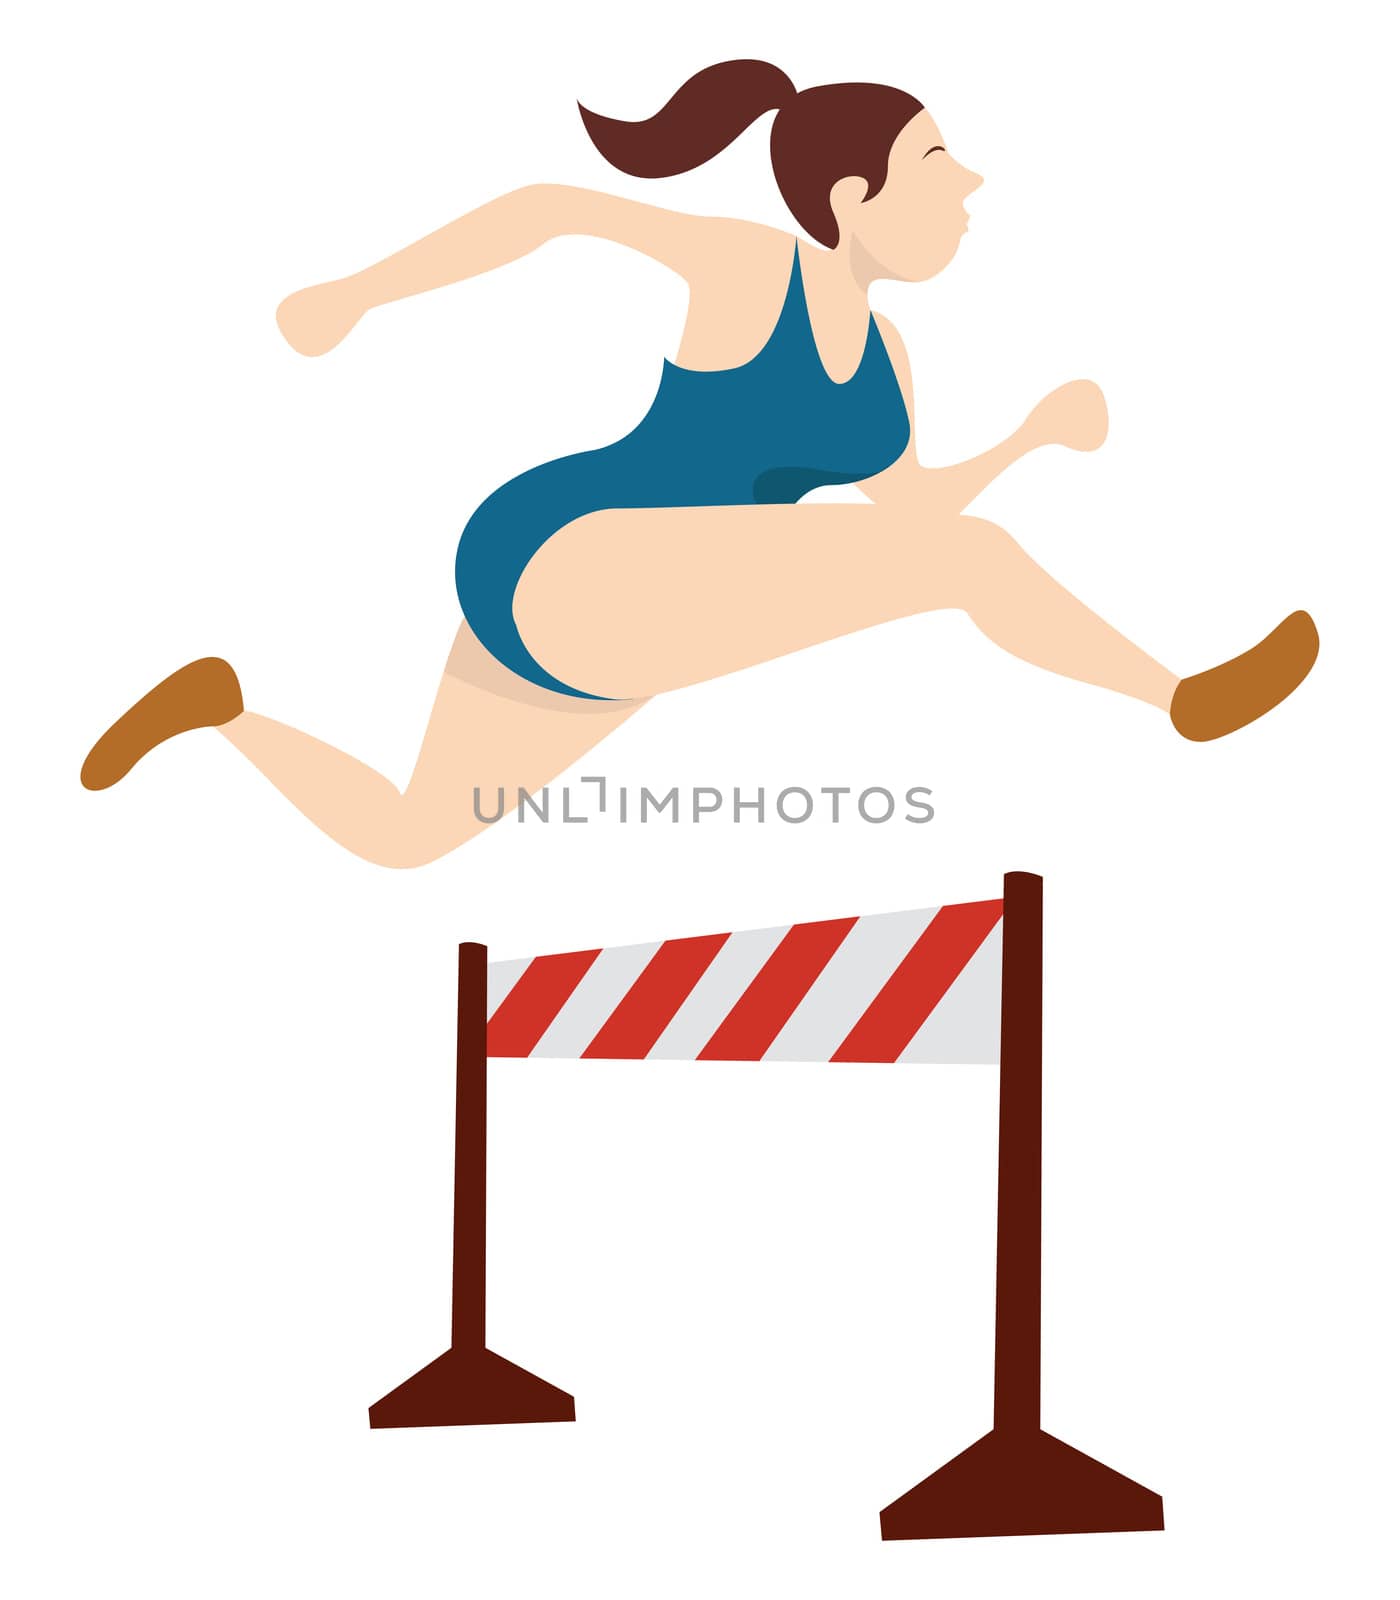 Running with obstacles , illustration, vector on white background